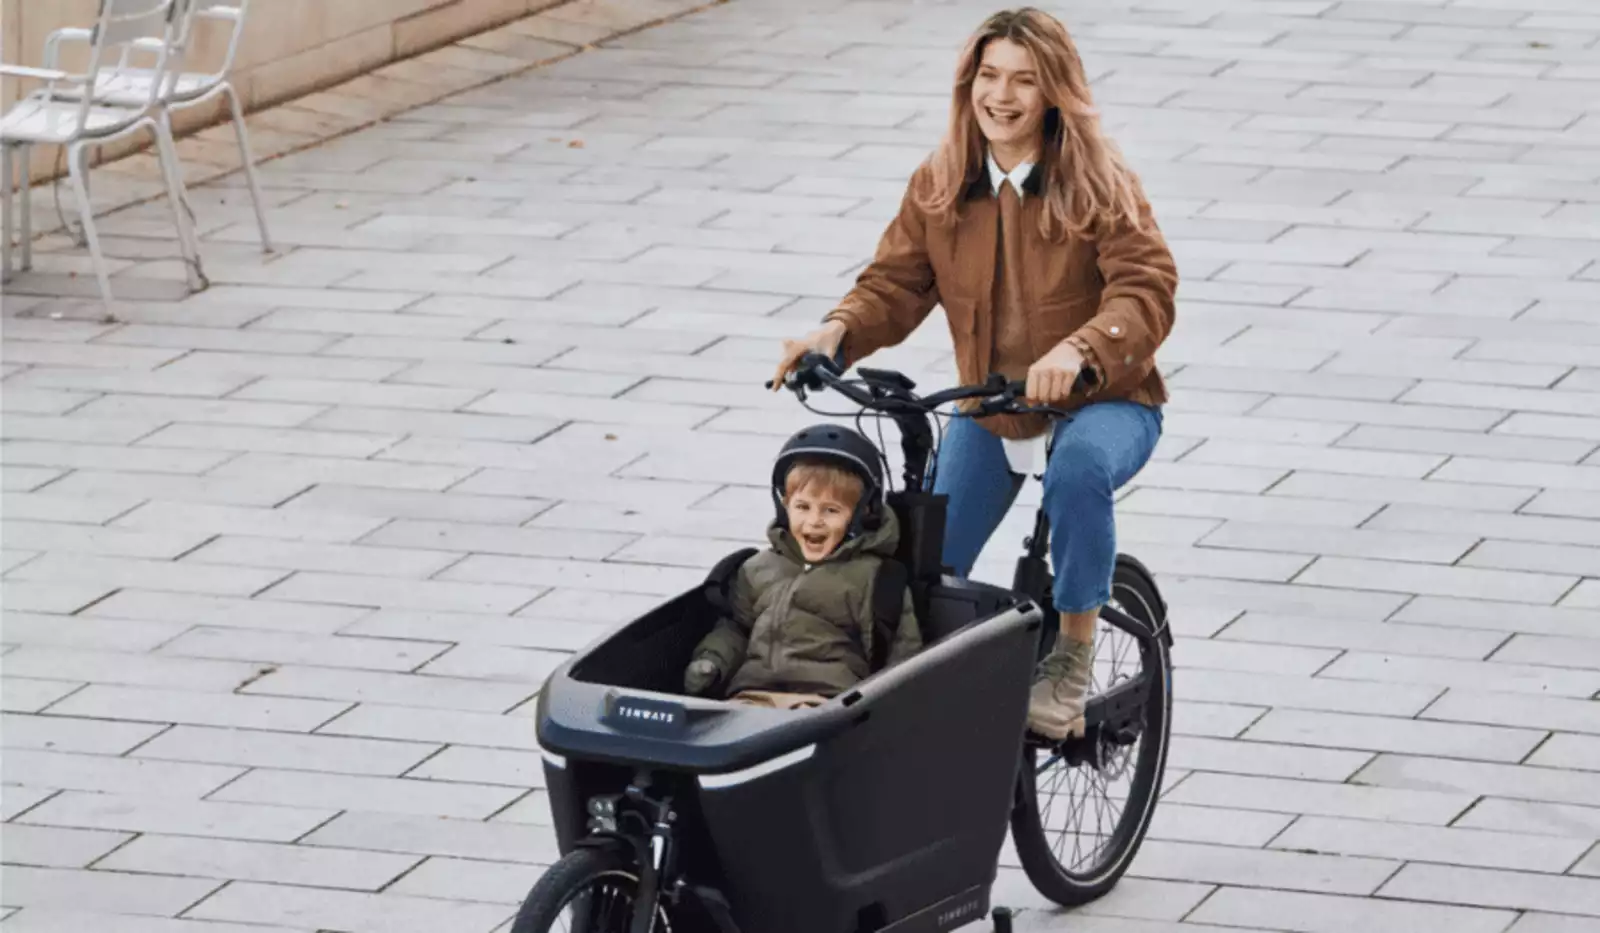 Tenways Cargo One: The Unbeatable Dual-Carrier Electric Bike